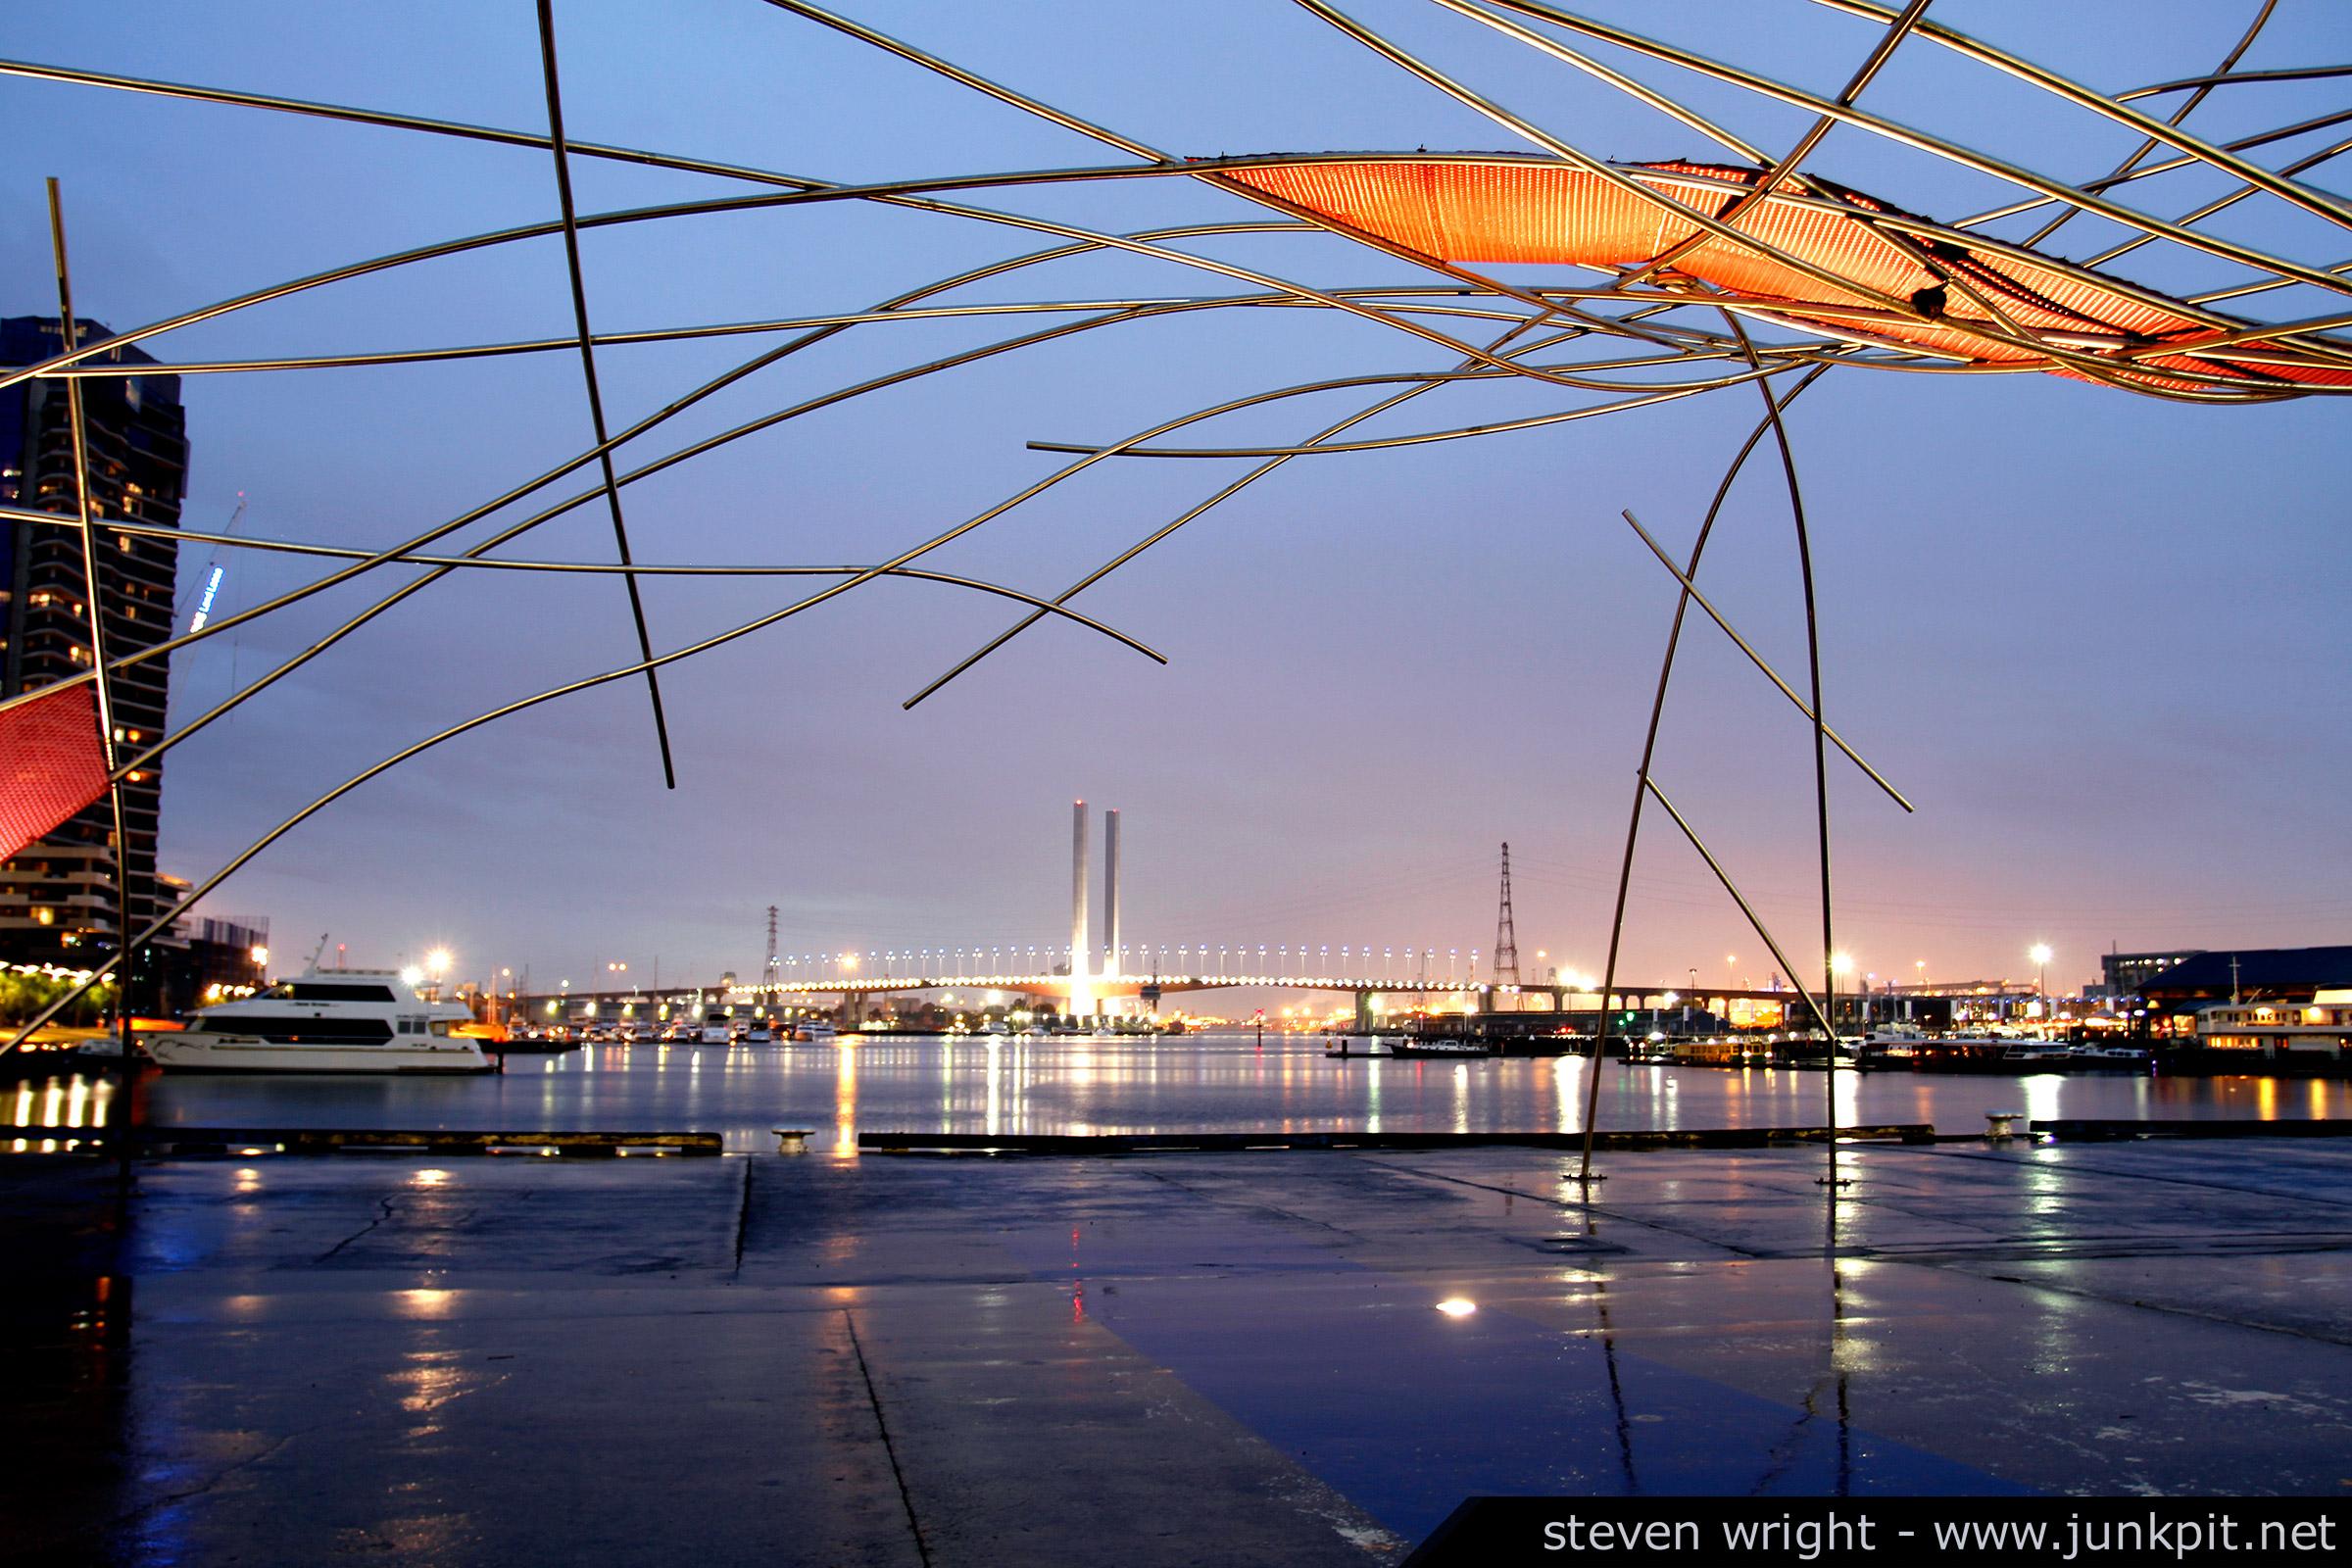 Cover image of this place The Docklands